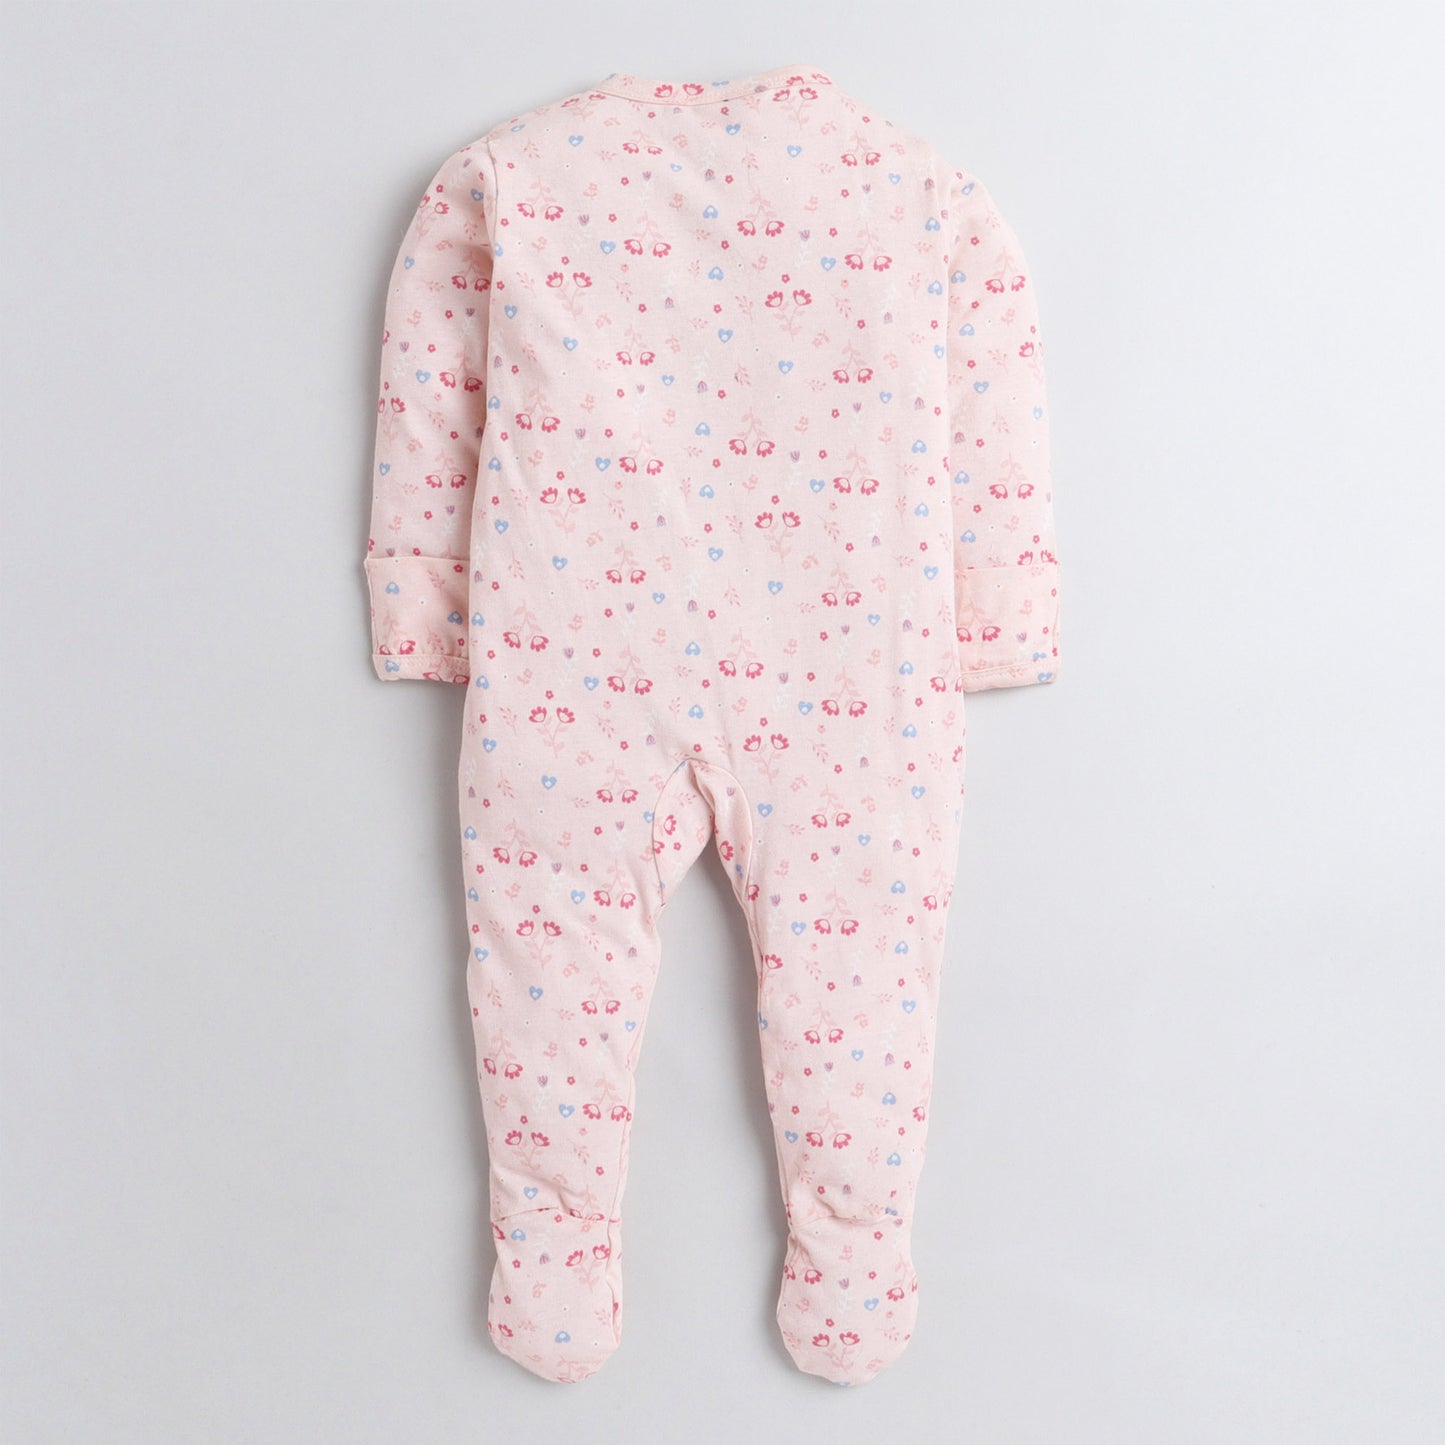 Polka Tots Footsie Romper With Mittens 100% Cotton Floral - Pink